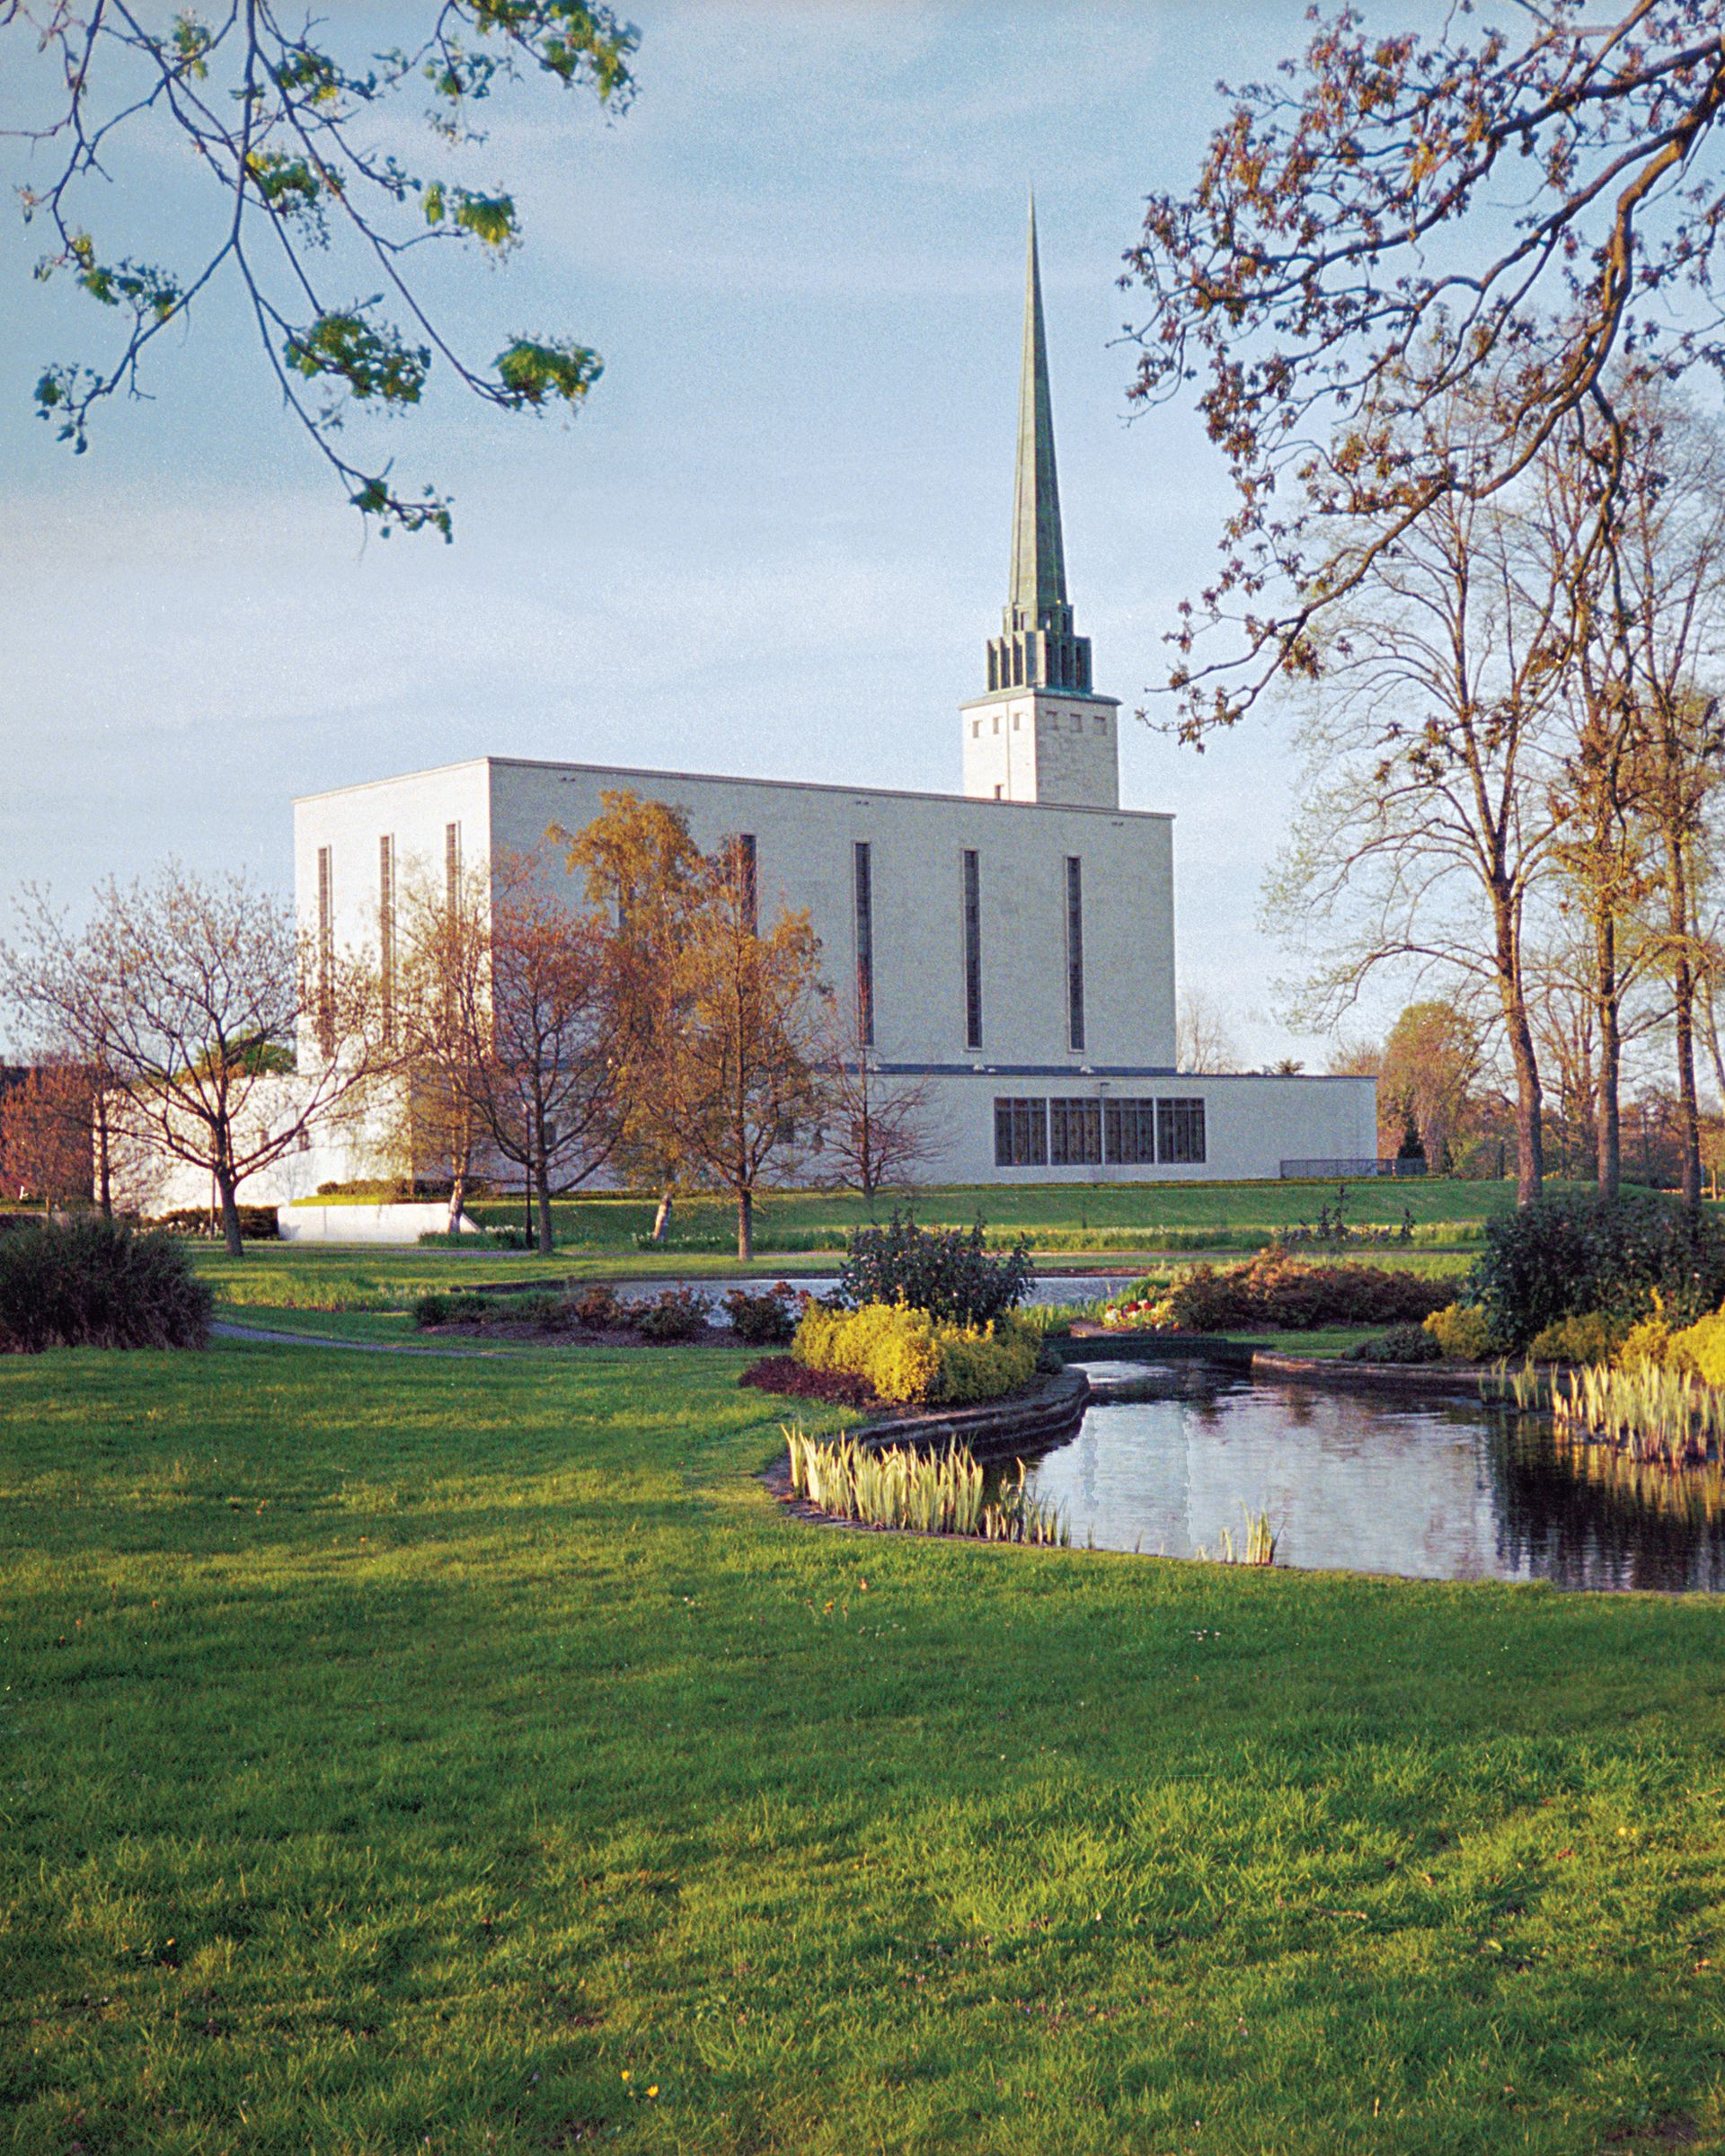 The London England Temple in the fall, including scenery.